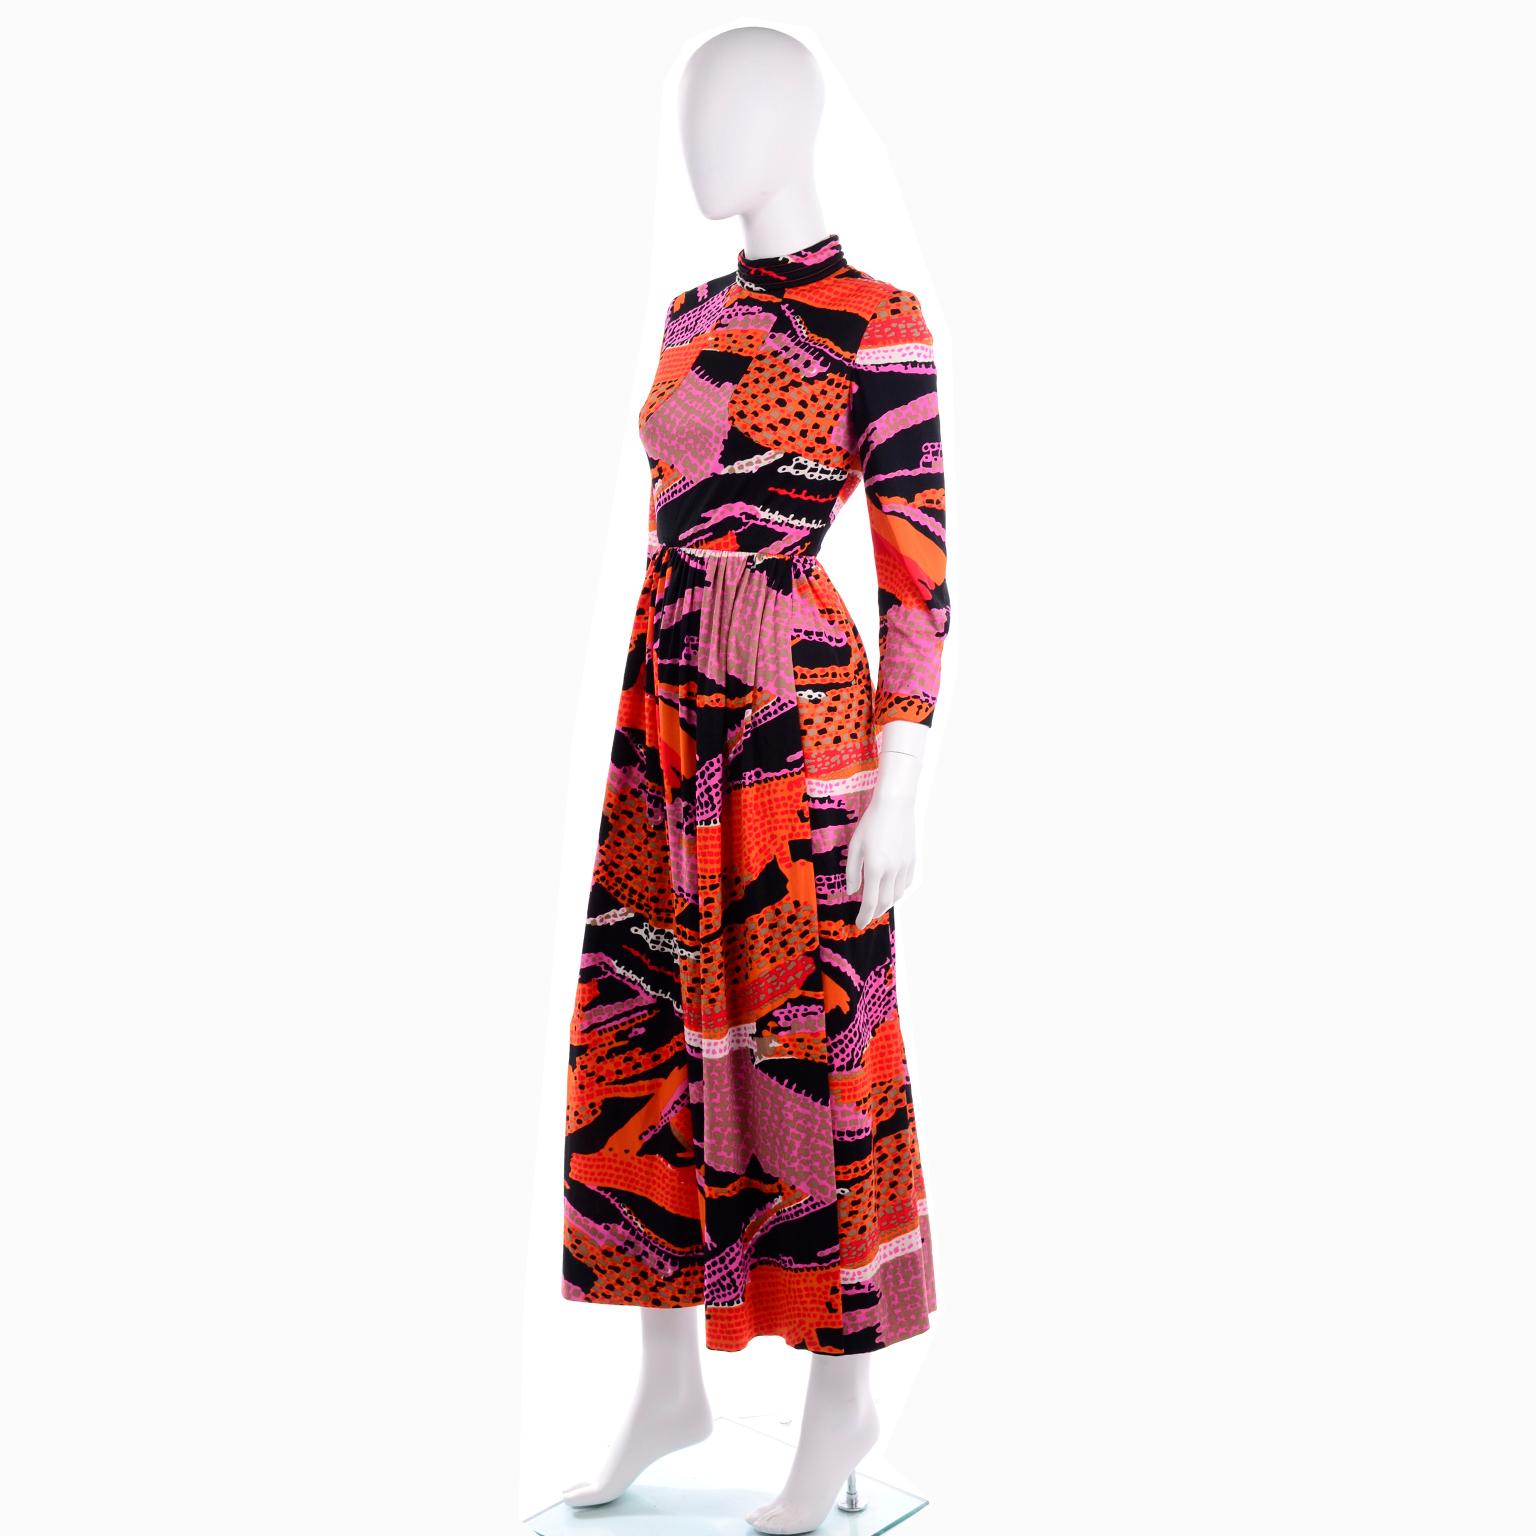 1970s Dynasty Vintage Maxi Dress in Mod Red Orange Pink & Black Abstract Print  4